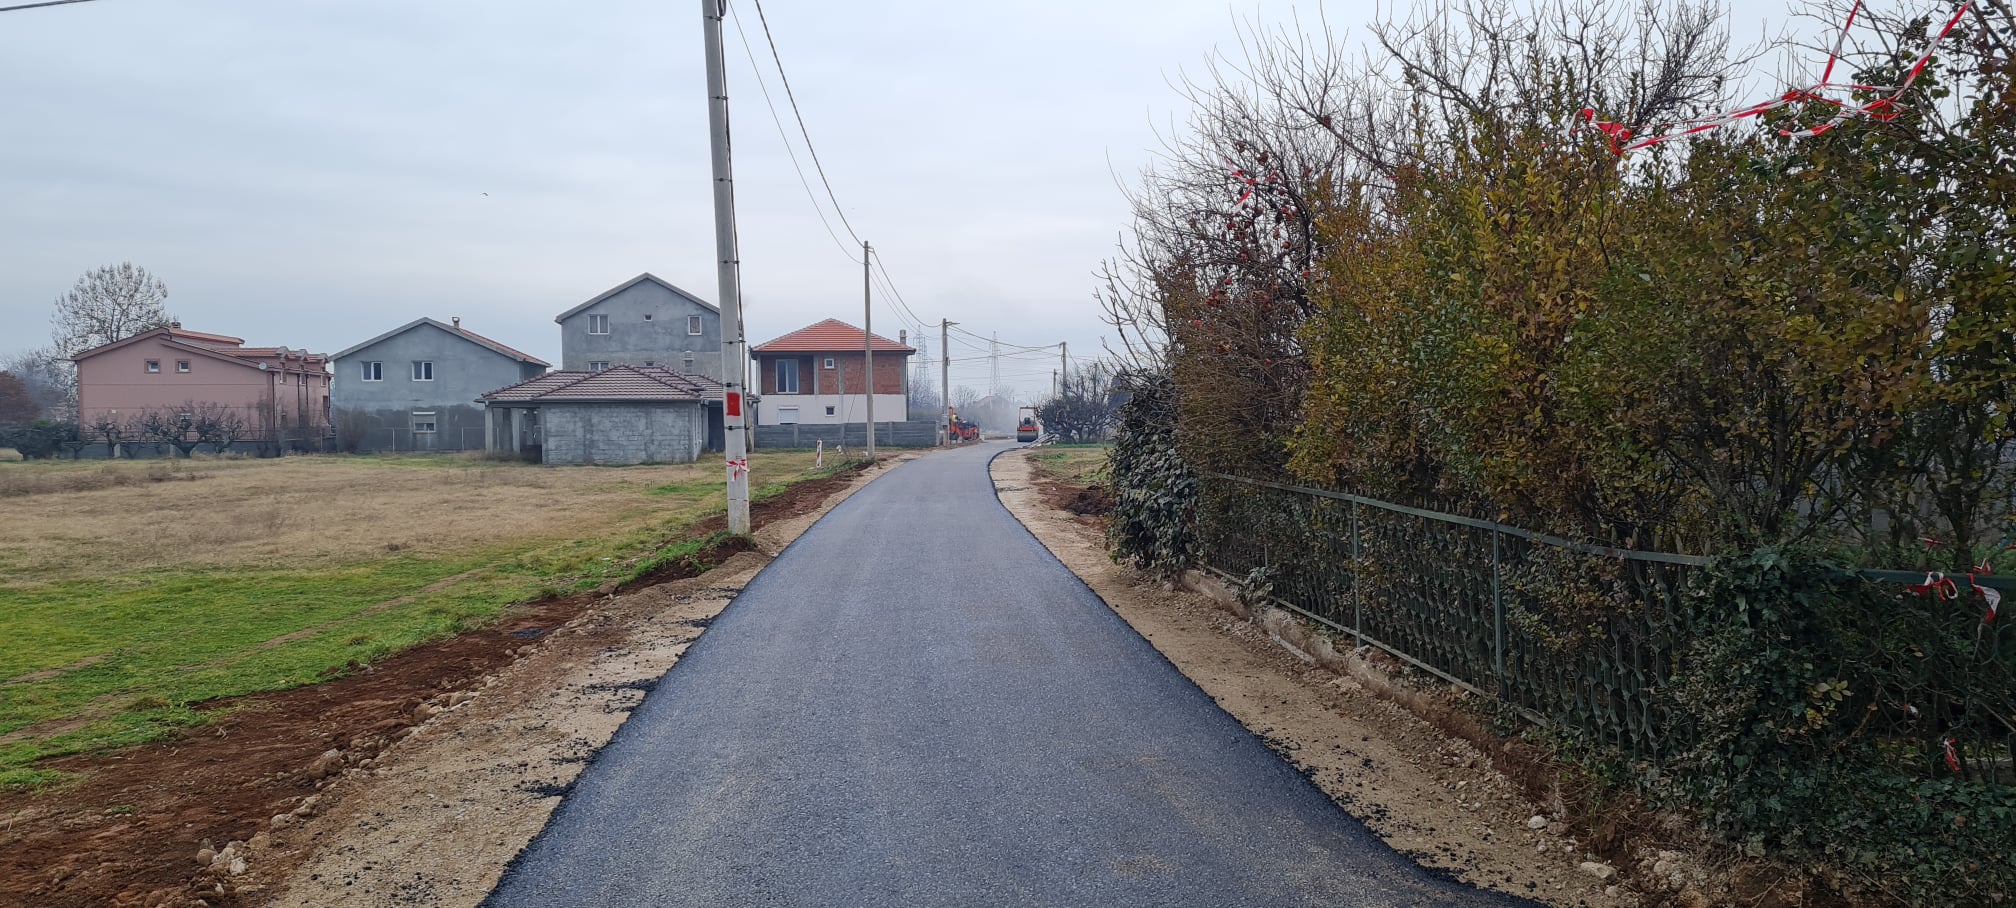 Works on the project of Wastewater Collection and Treatment in Podgorica have continued